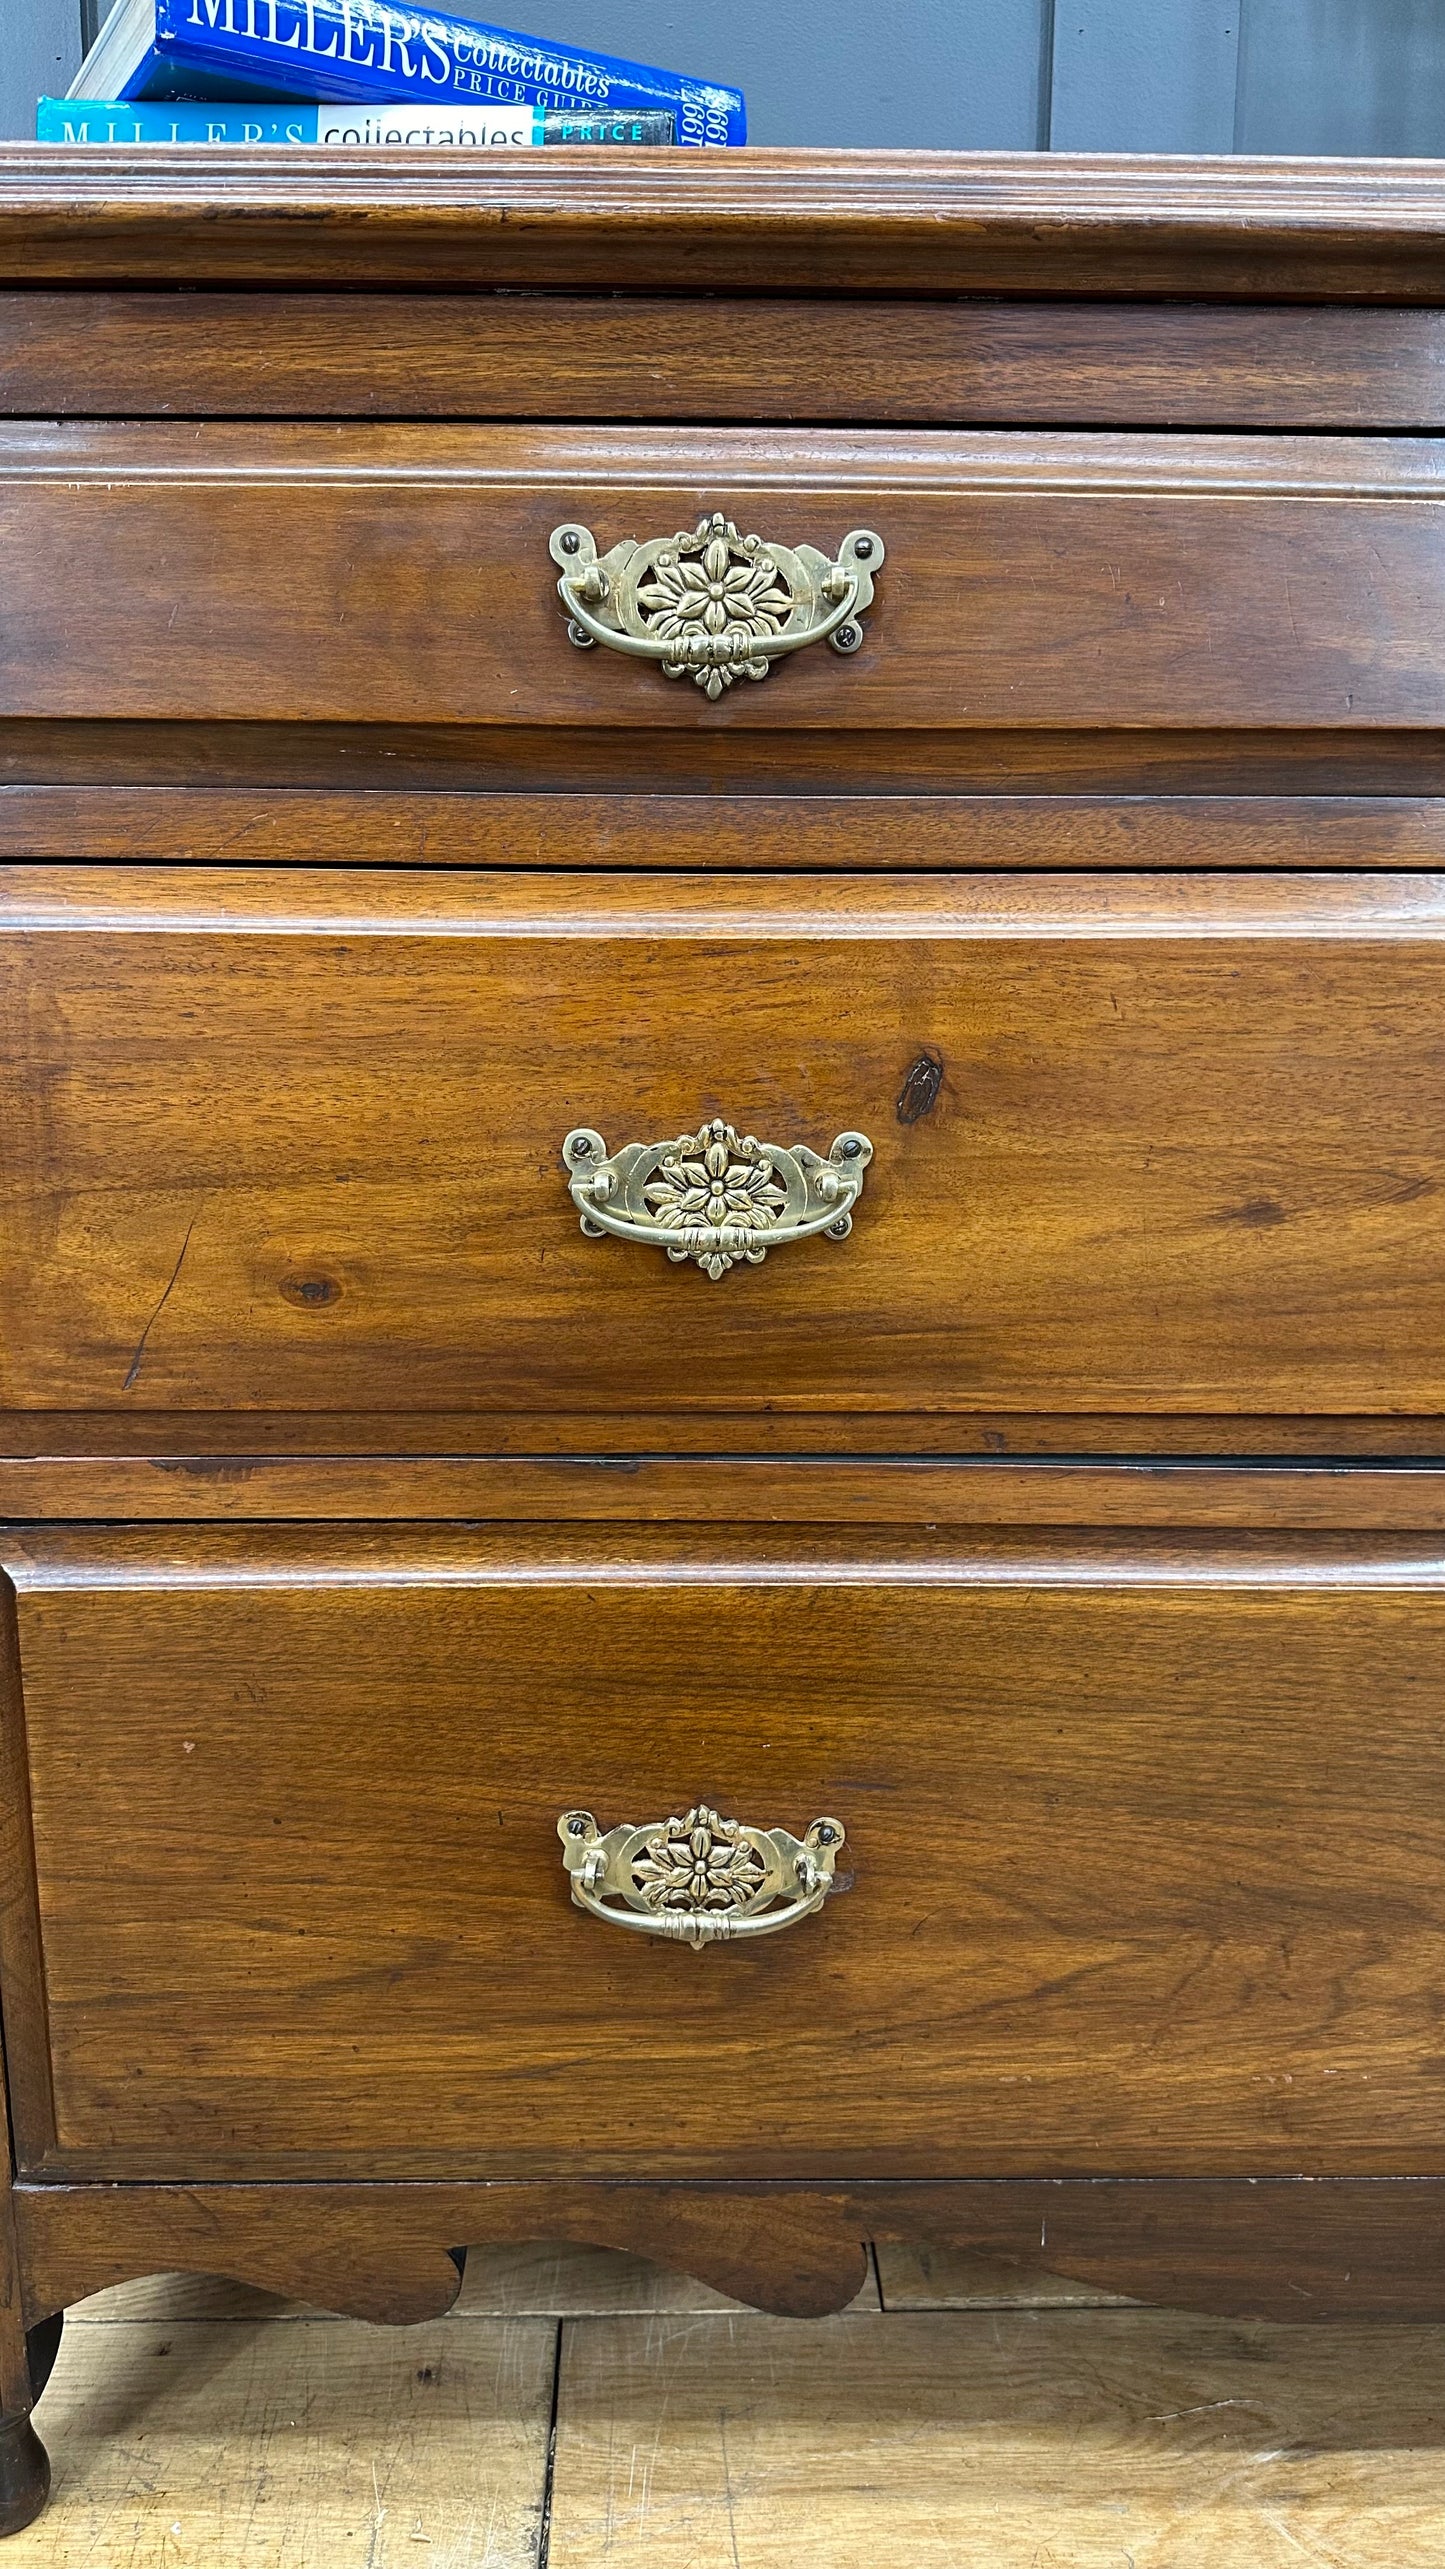 Antique Mahogany Chest Of Drawers / Bedroom Furniture/ Victorian Drawers